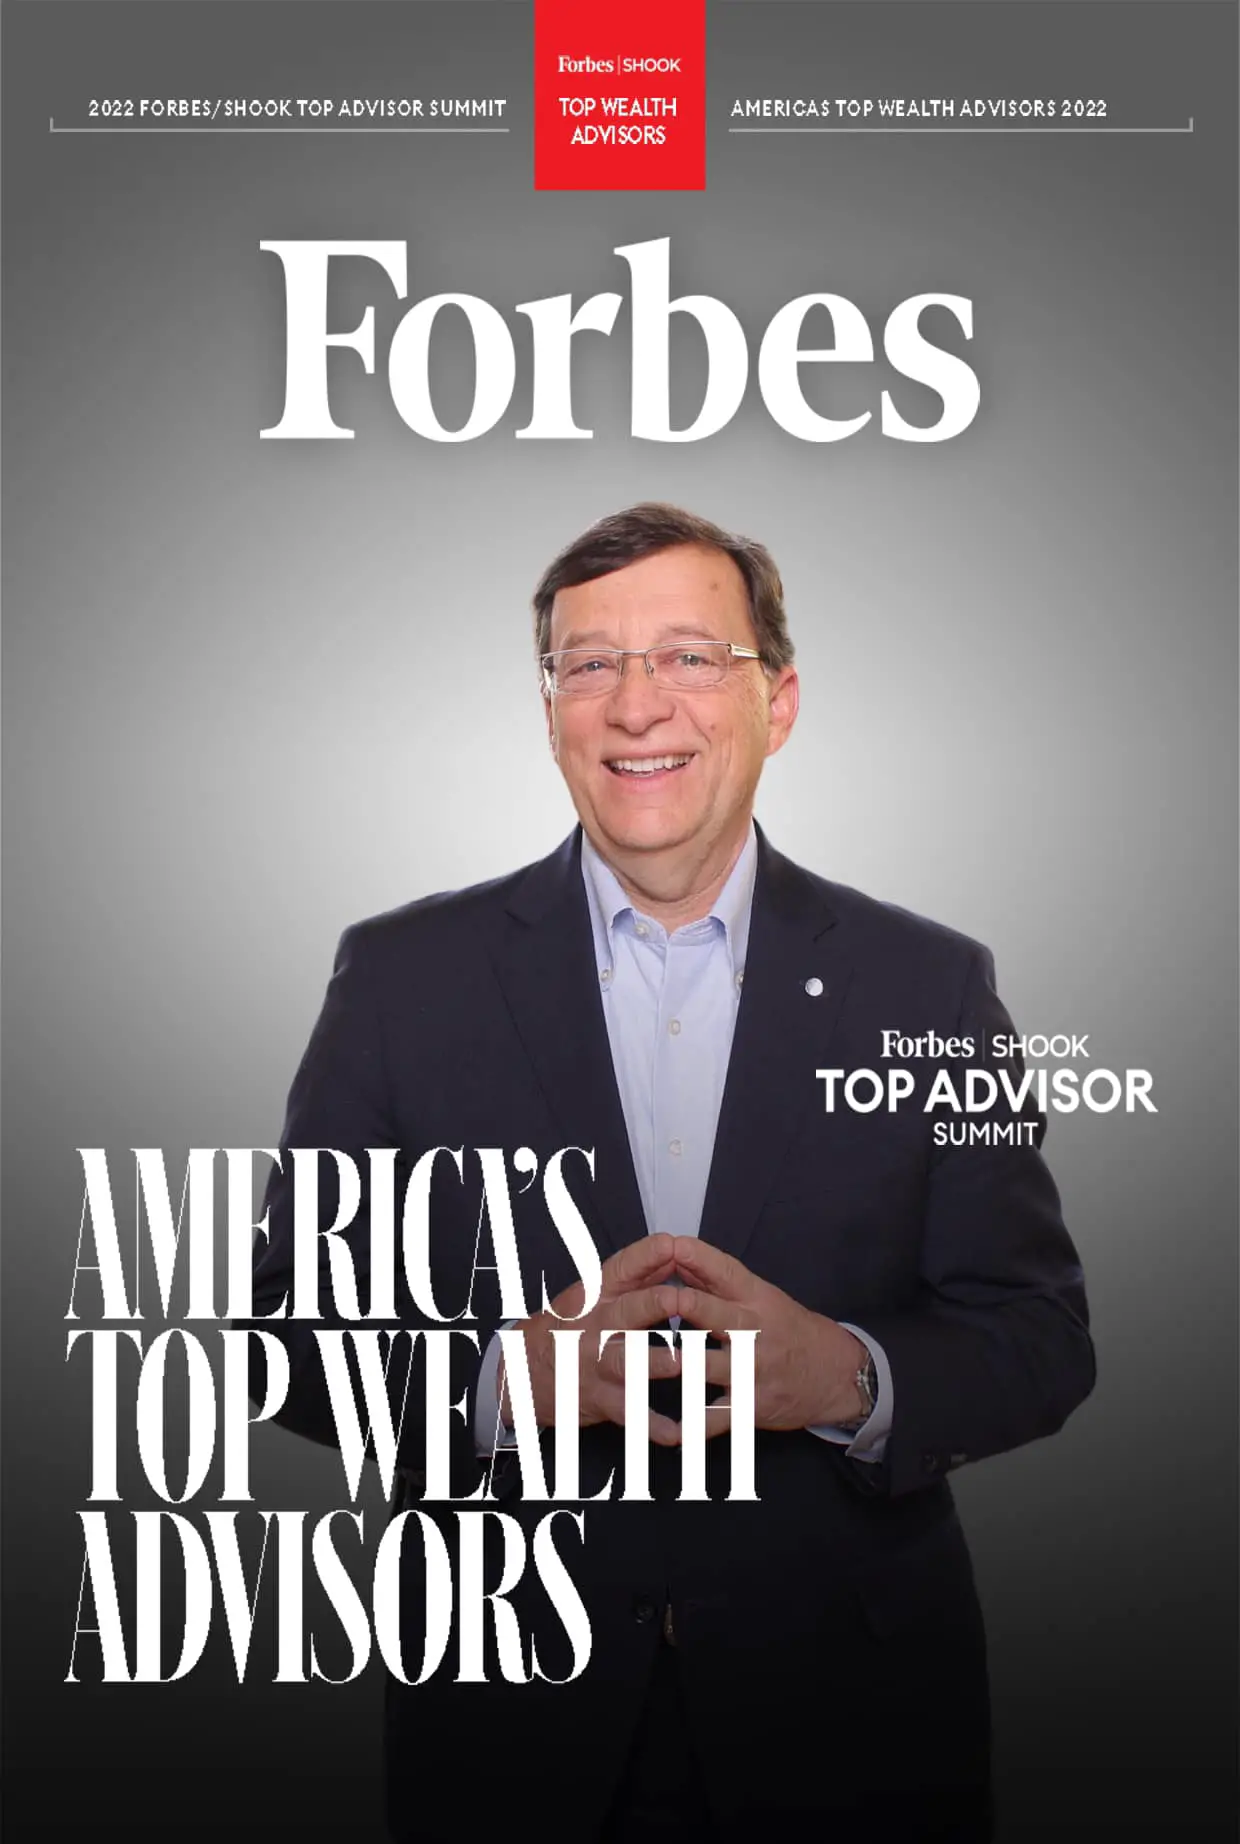 Ricky Smith in Forbes for America's Top Wealth Advisor - Cordele Dispatch